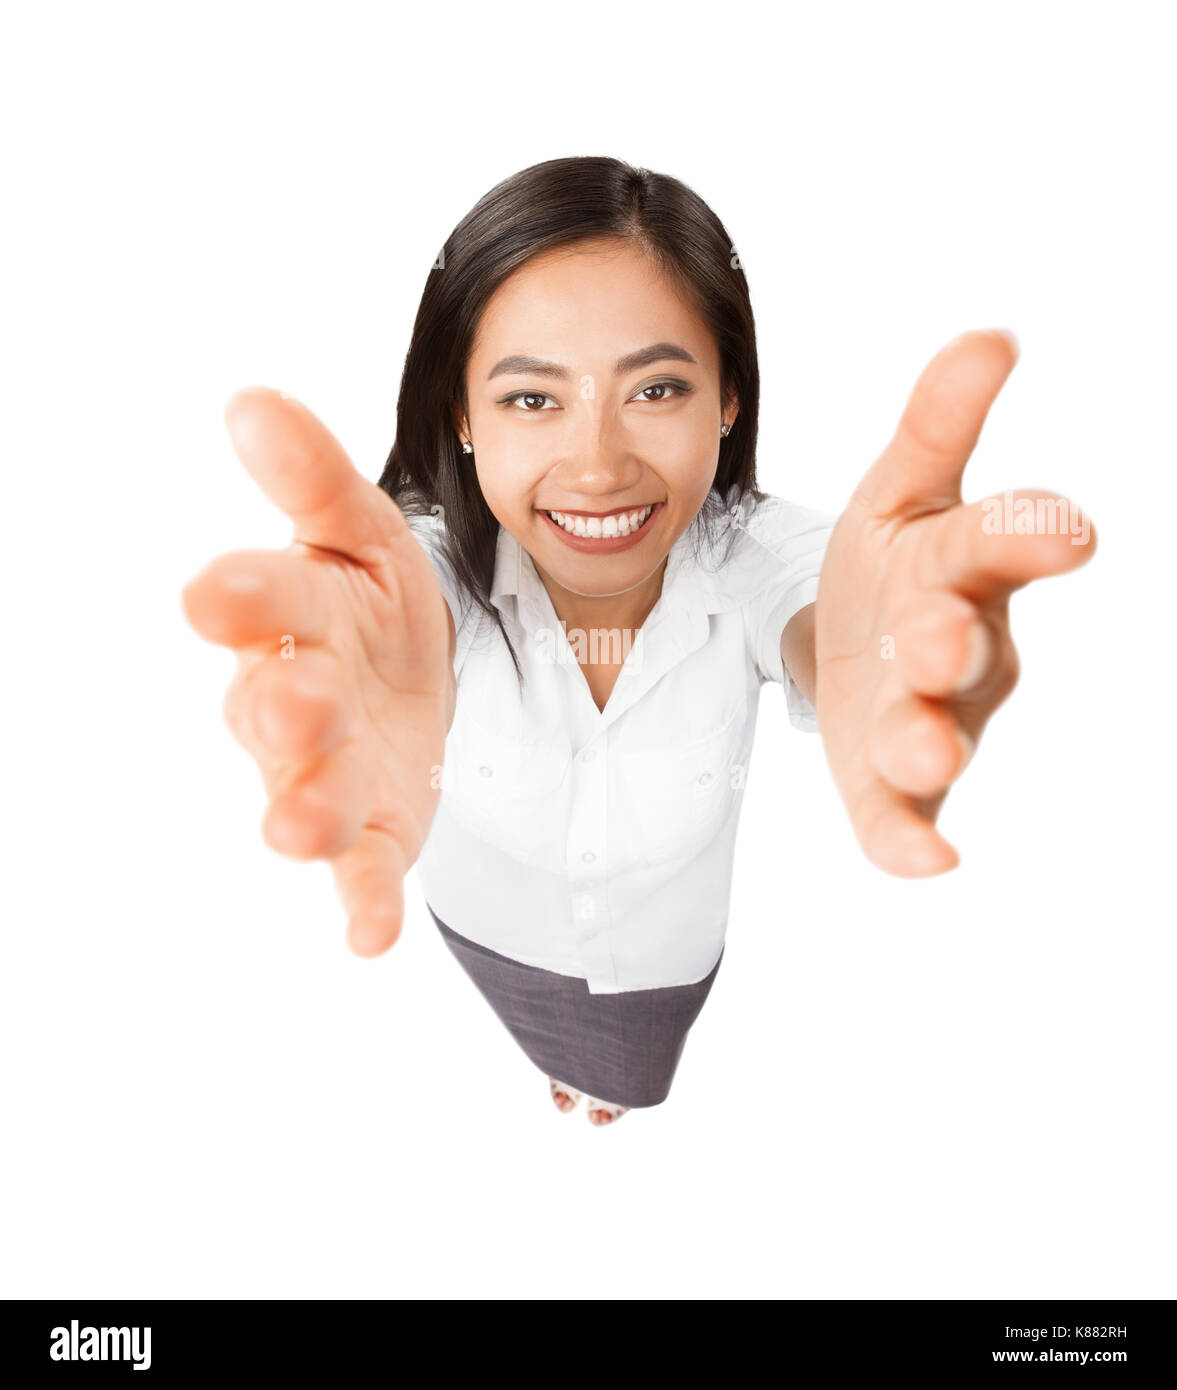 High angle view portrait of Asian young woman with arms outstretched to camera. Beautiful happy smiling girl with hand up in welcome or embrace gestur Stock Photo